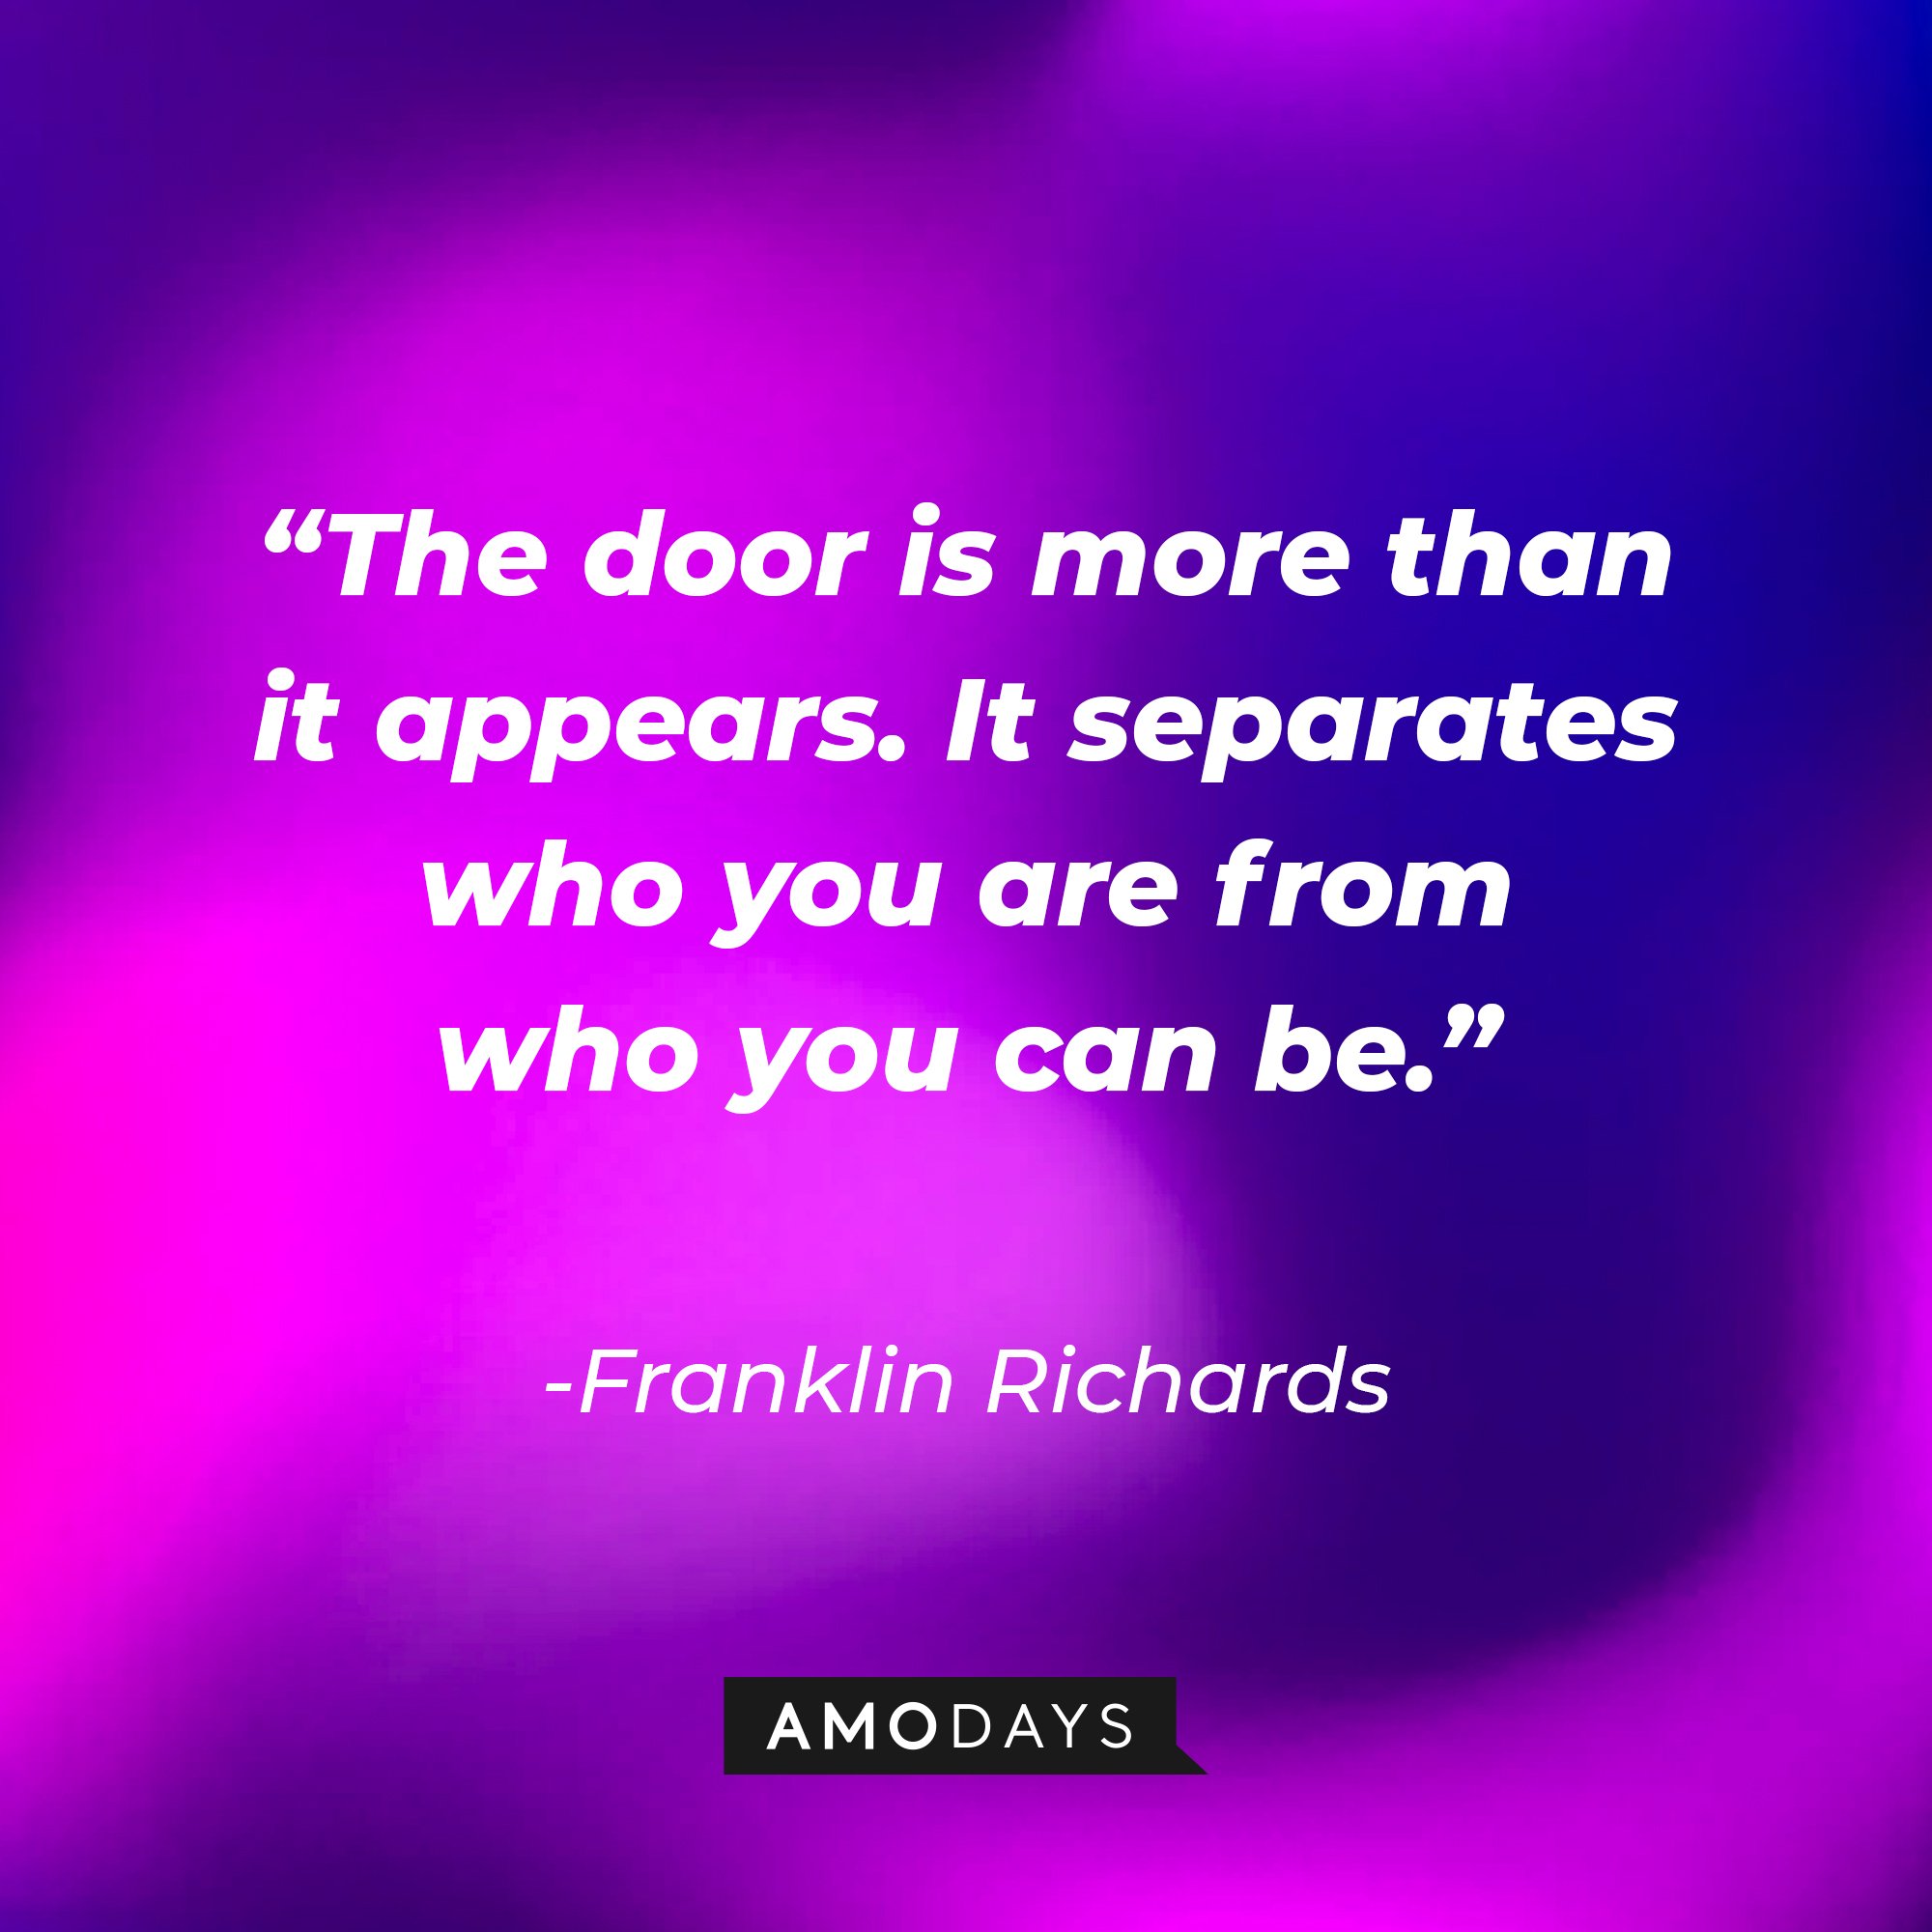   Franklin Richards's quote: “The door is more than it appears. It separates who you are from who you can be. You do not have to walk through it.” | Image: AmoDays